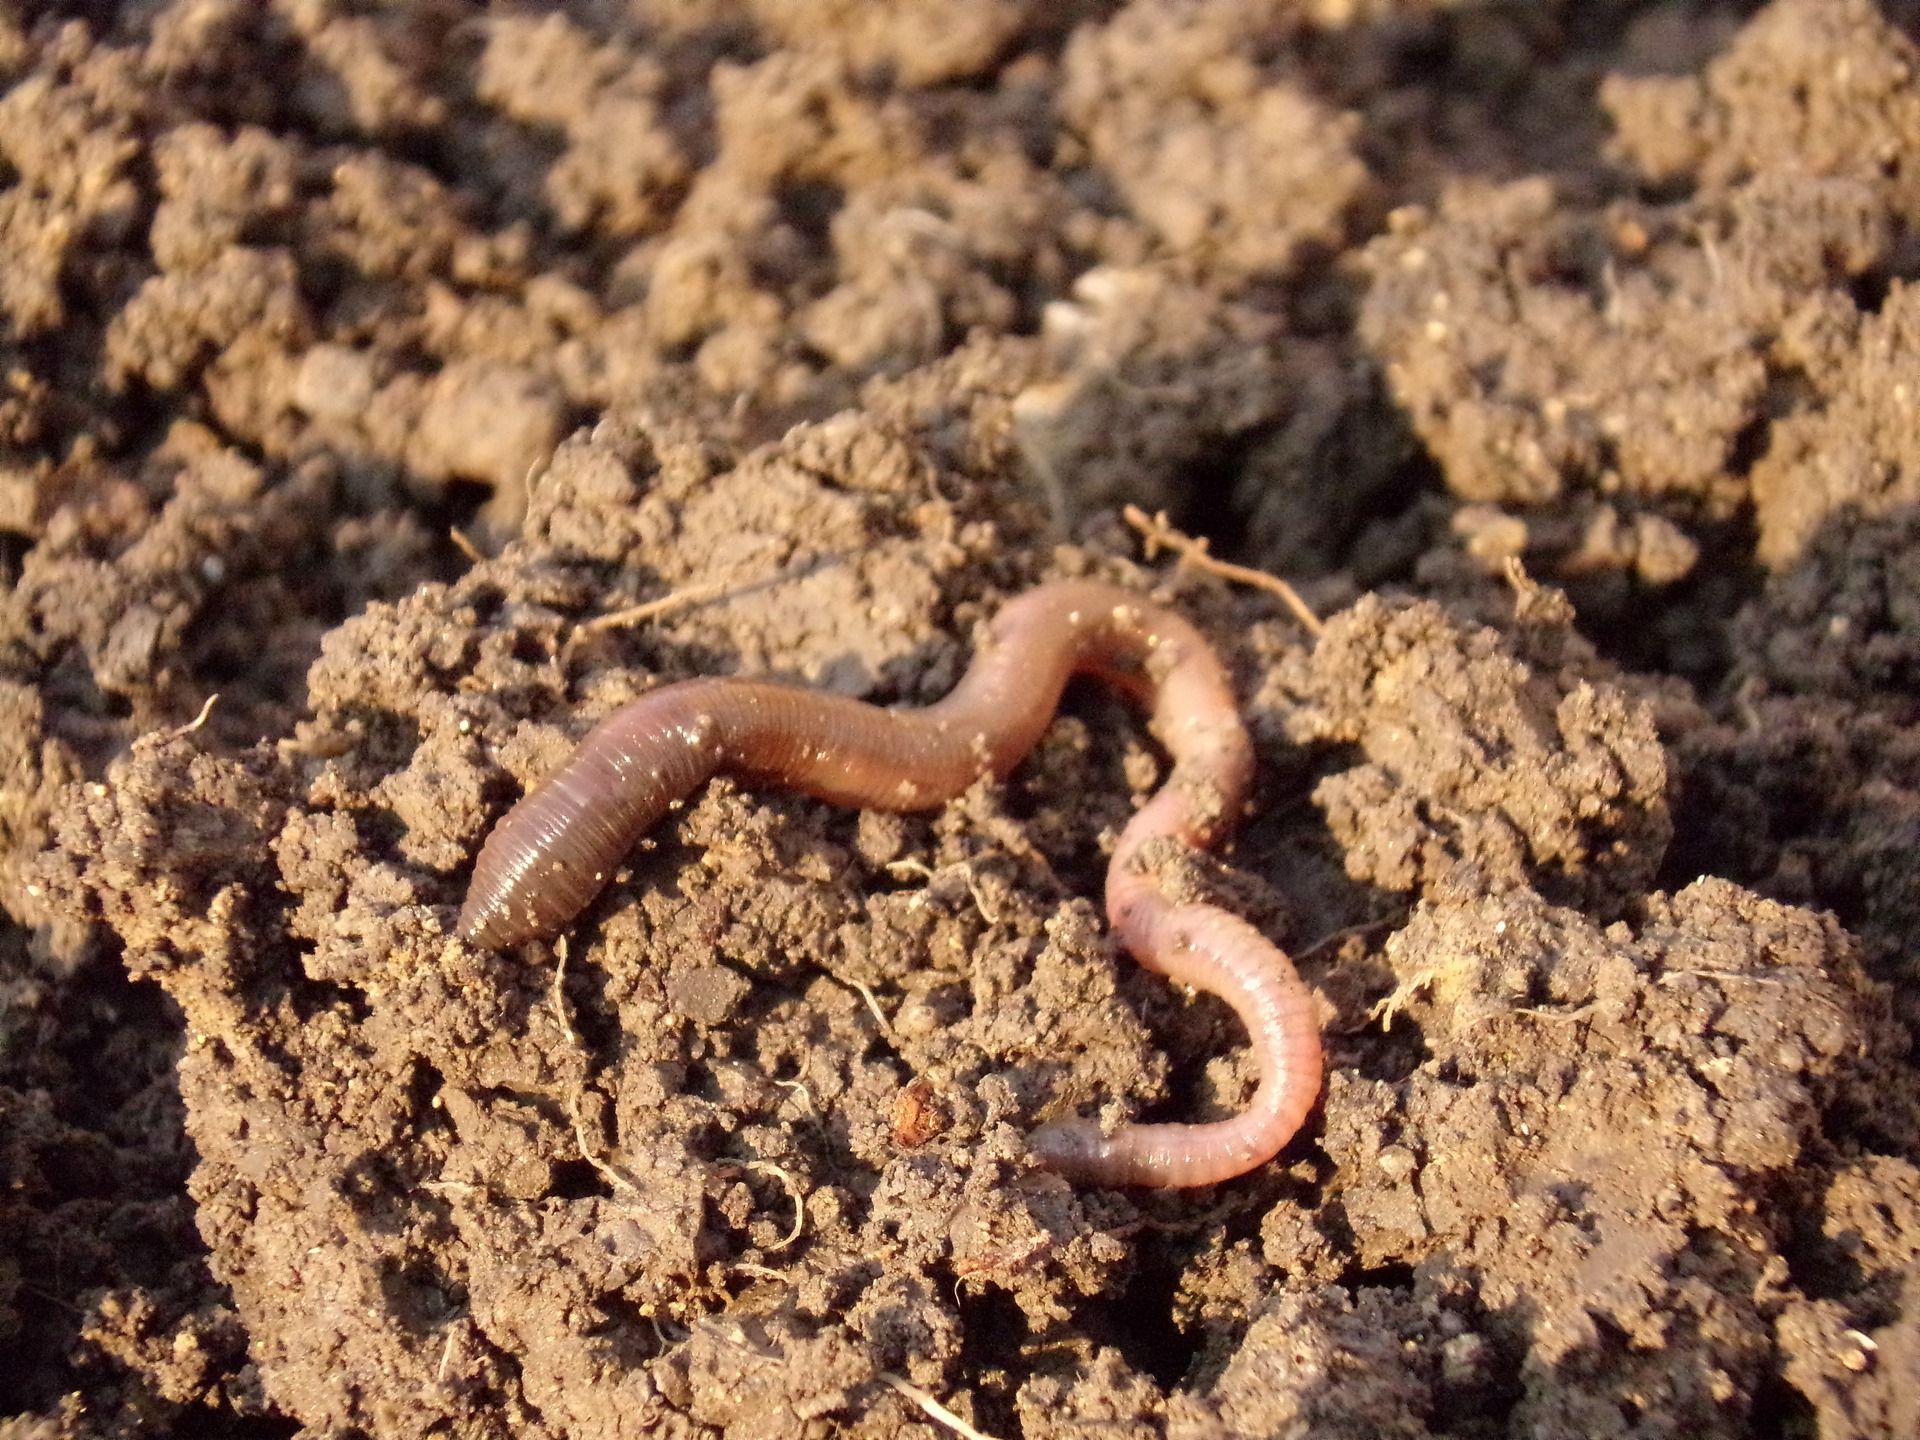 A close up photo of an earth worm in soil.